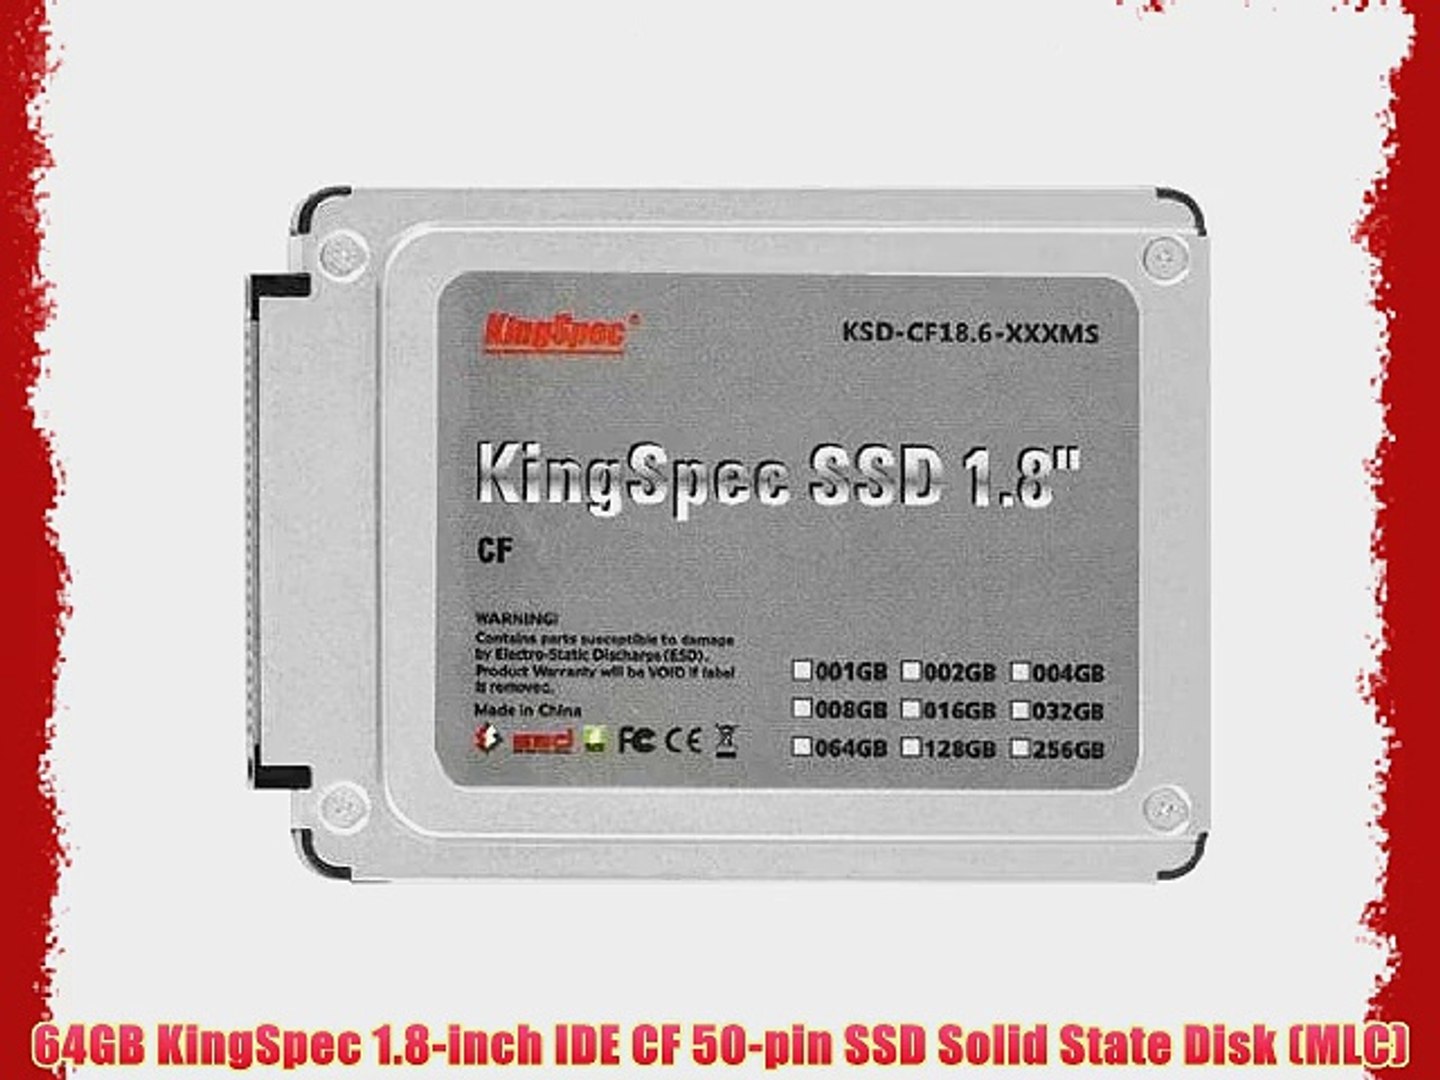 64GB KingSpec 1.8-inch IDE CF 50-pin SSD Solid State Disk (MLC) - video  Dailymotion